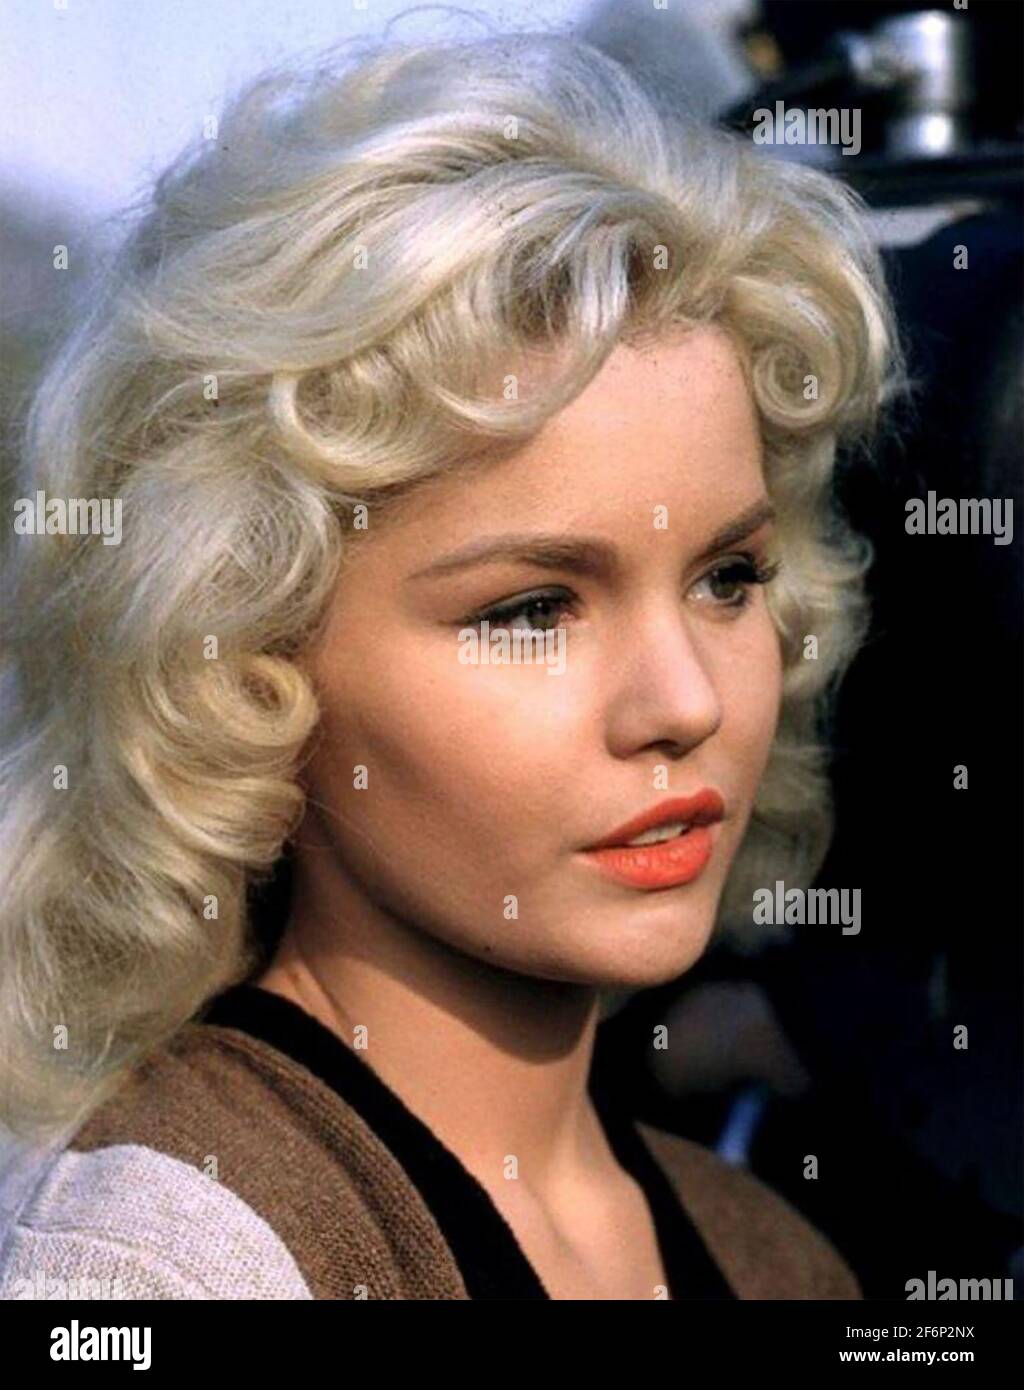 Tuesday Weld - Turner Classic Movies